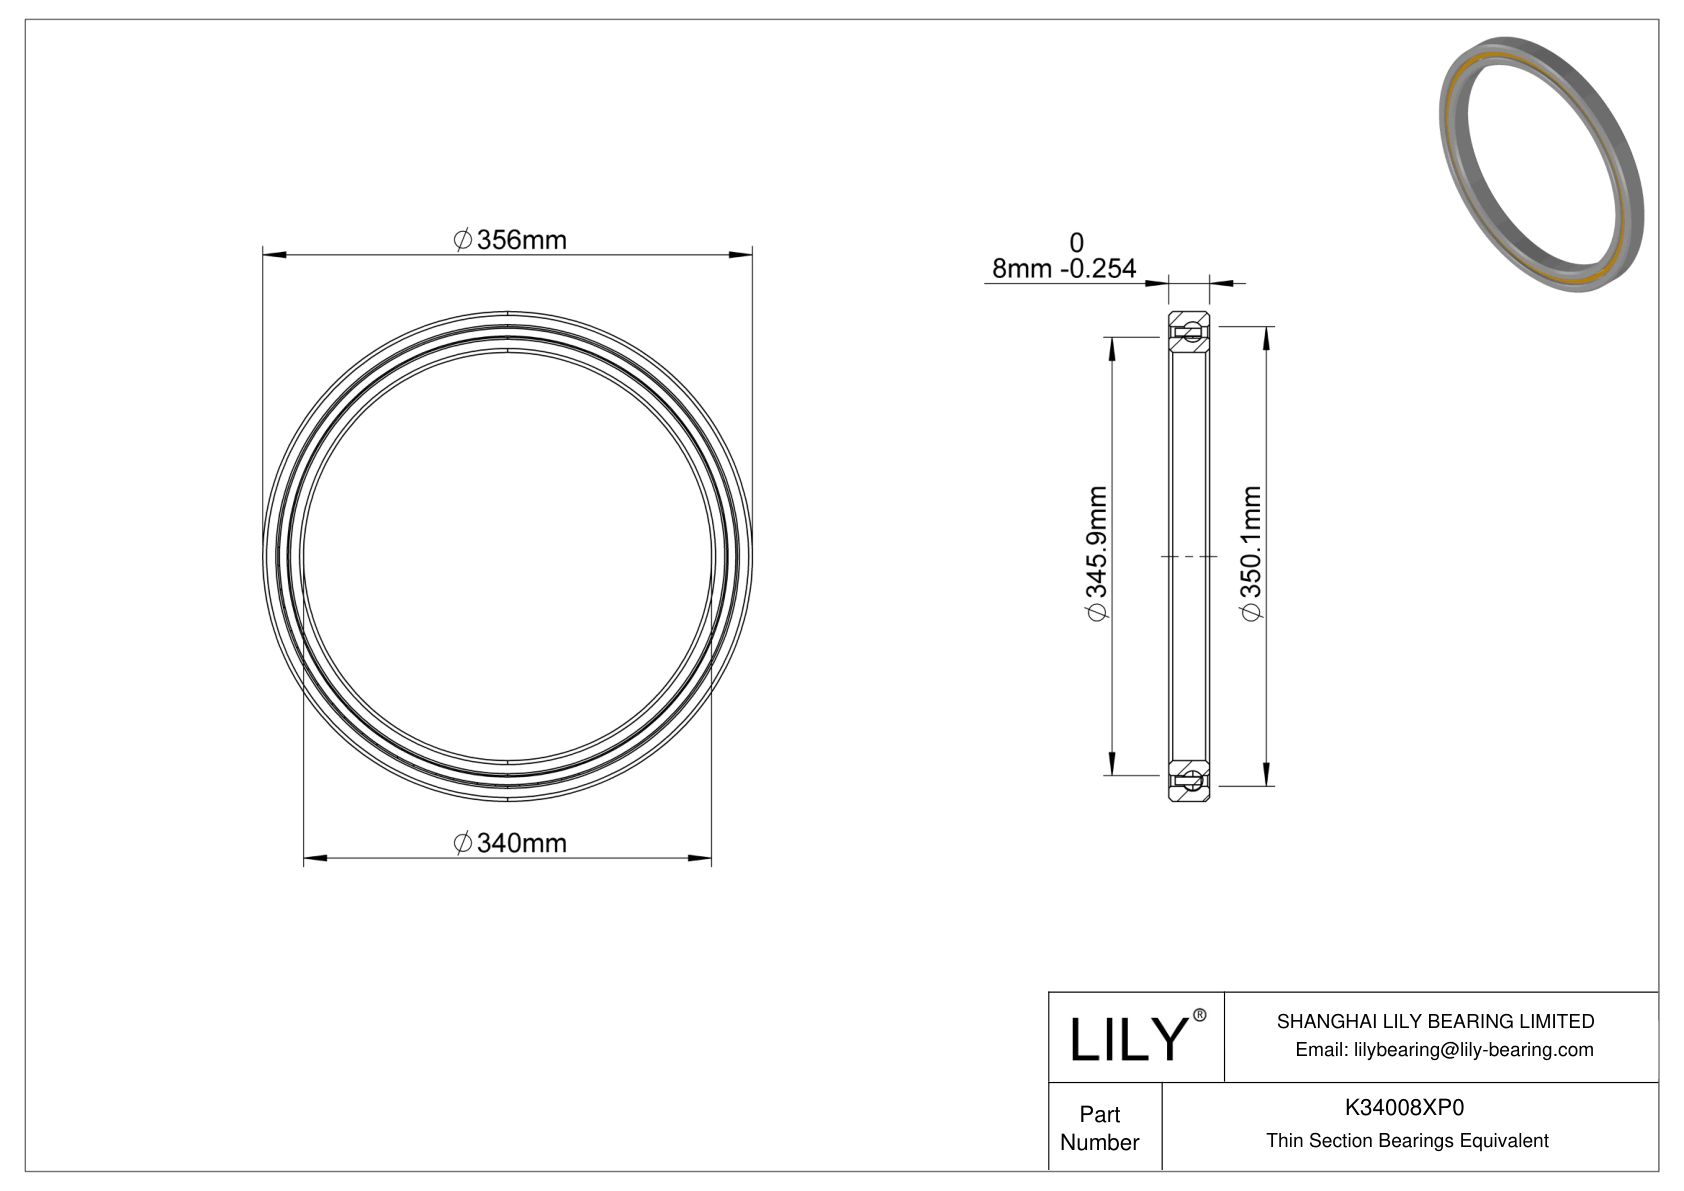 K34008XP0 Constant Section (CS) Bearings cad drawing